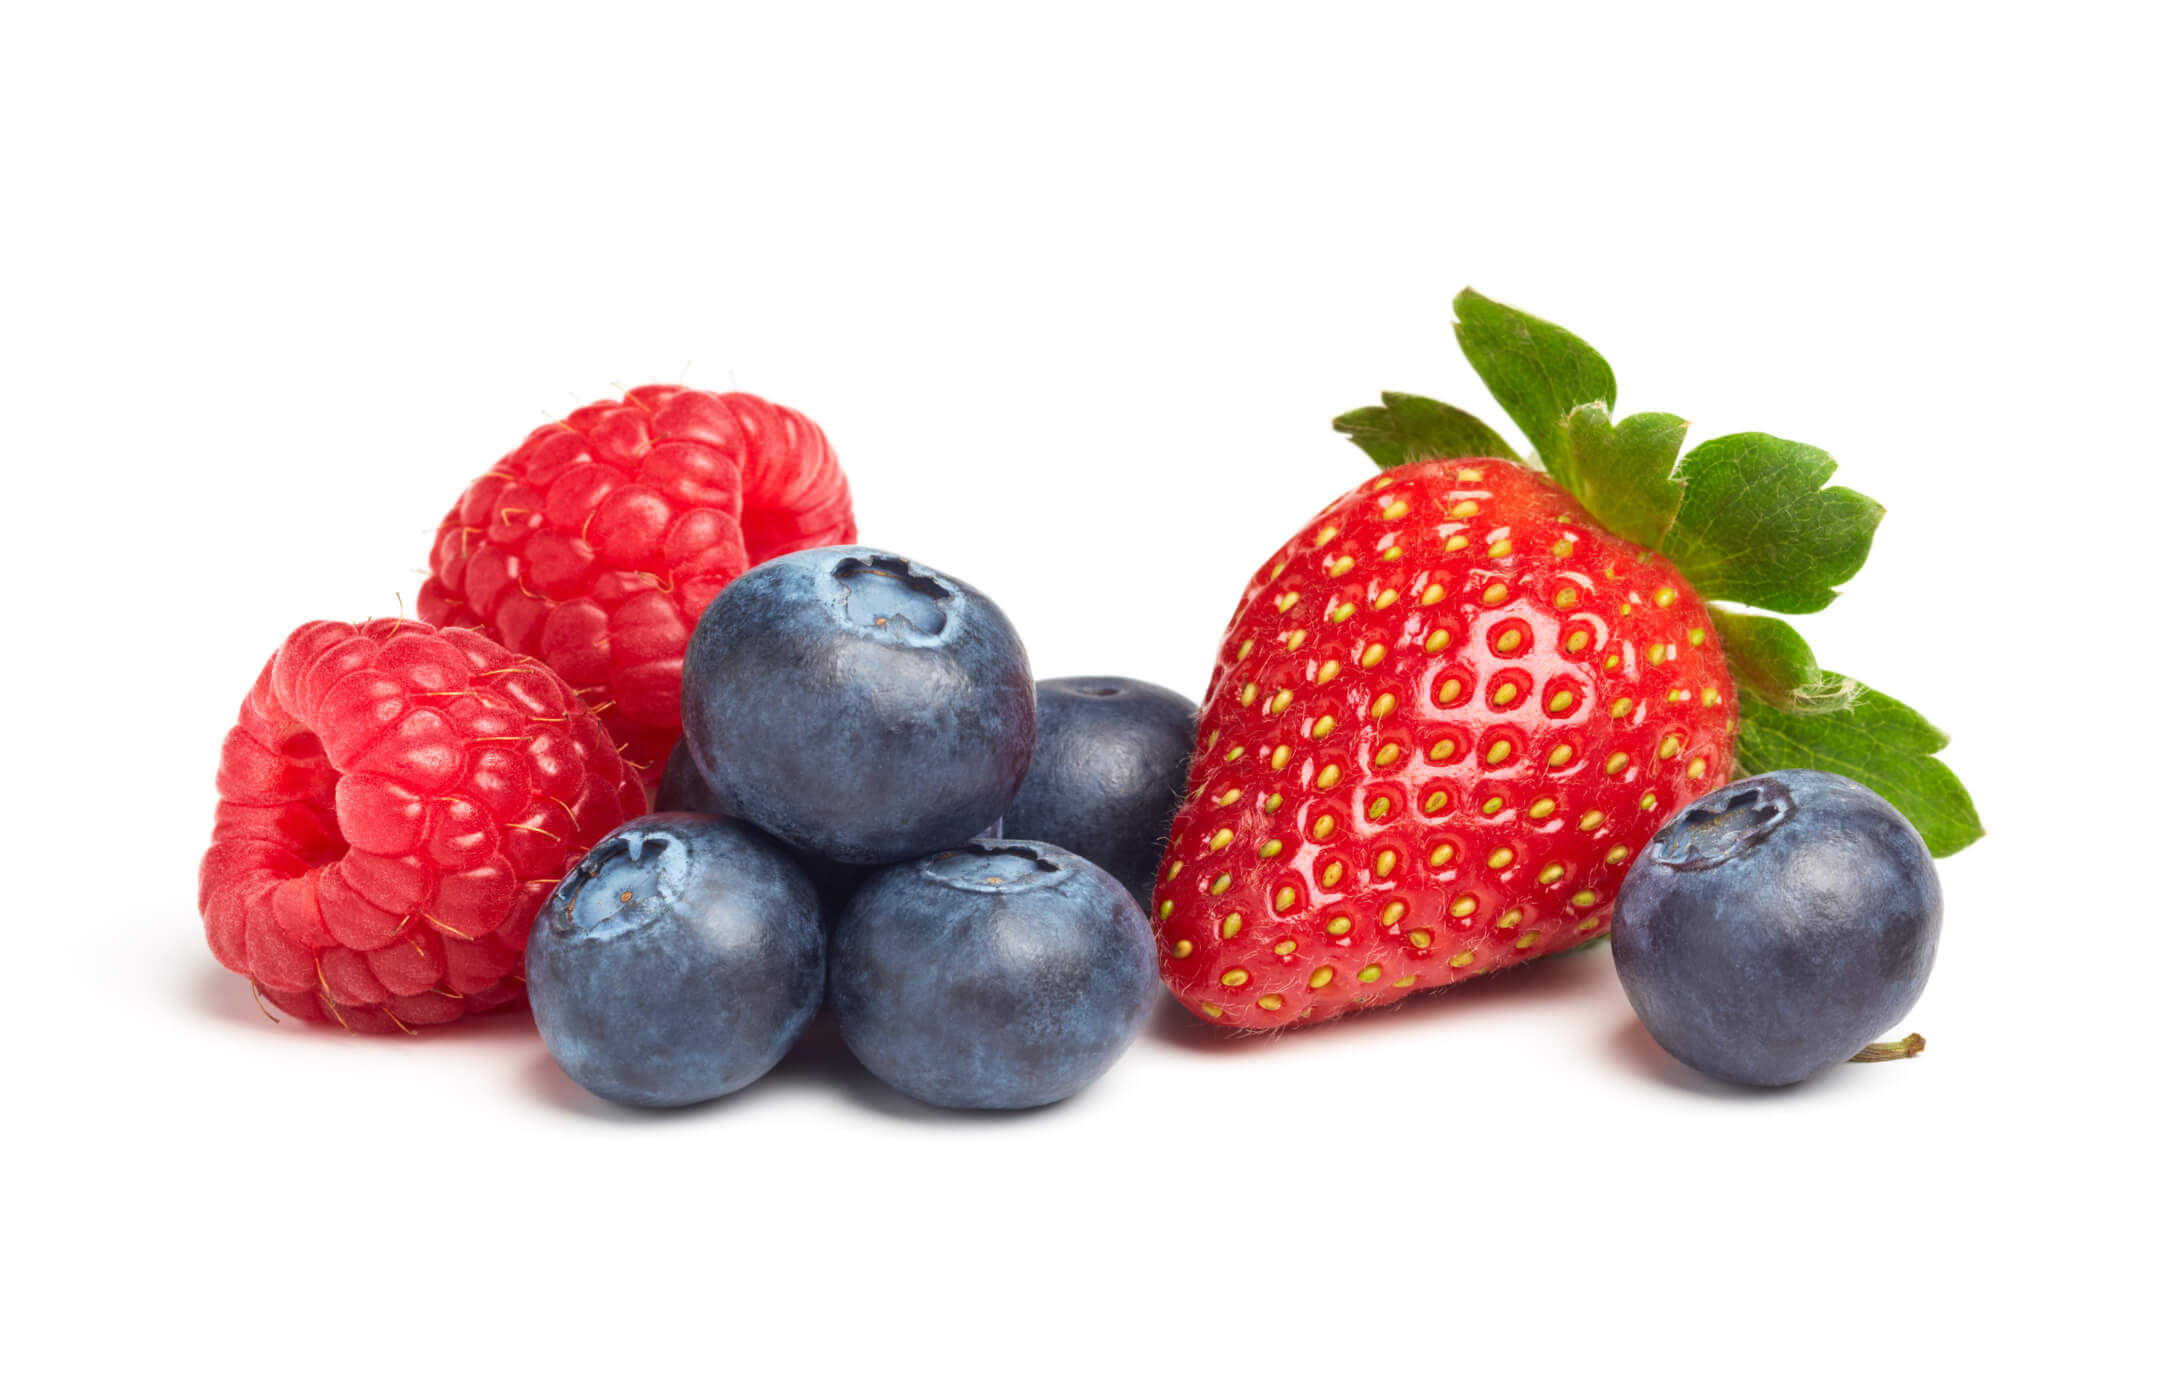 A picture of two raspberries, four blueberries, and one strawberry against a white background